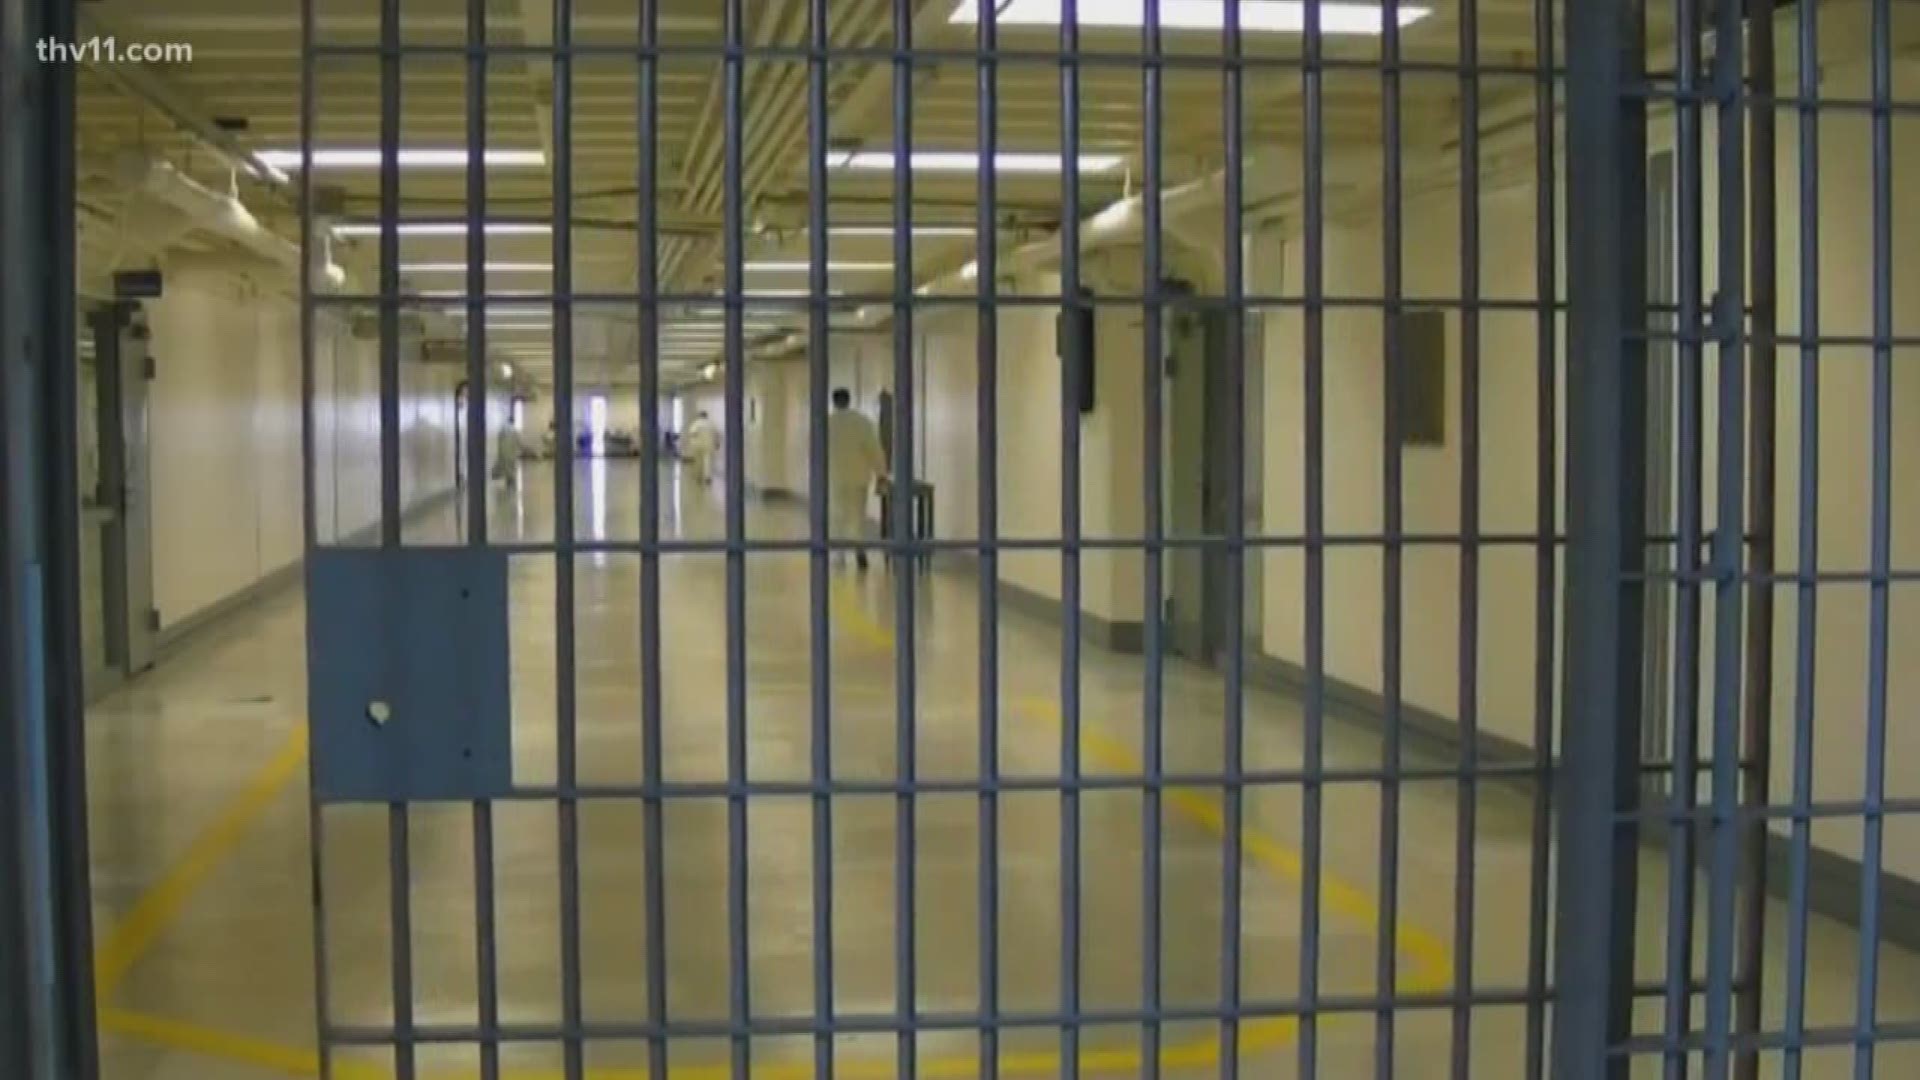 Prisoners are finding ways to illegally using cell phones.